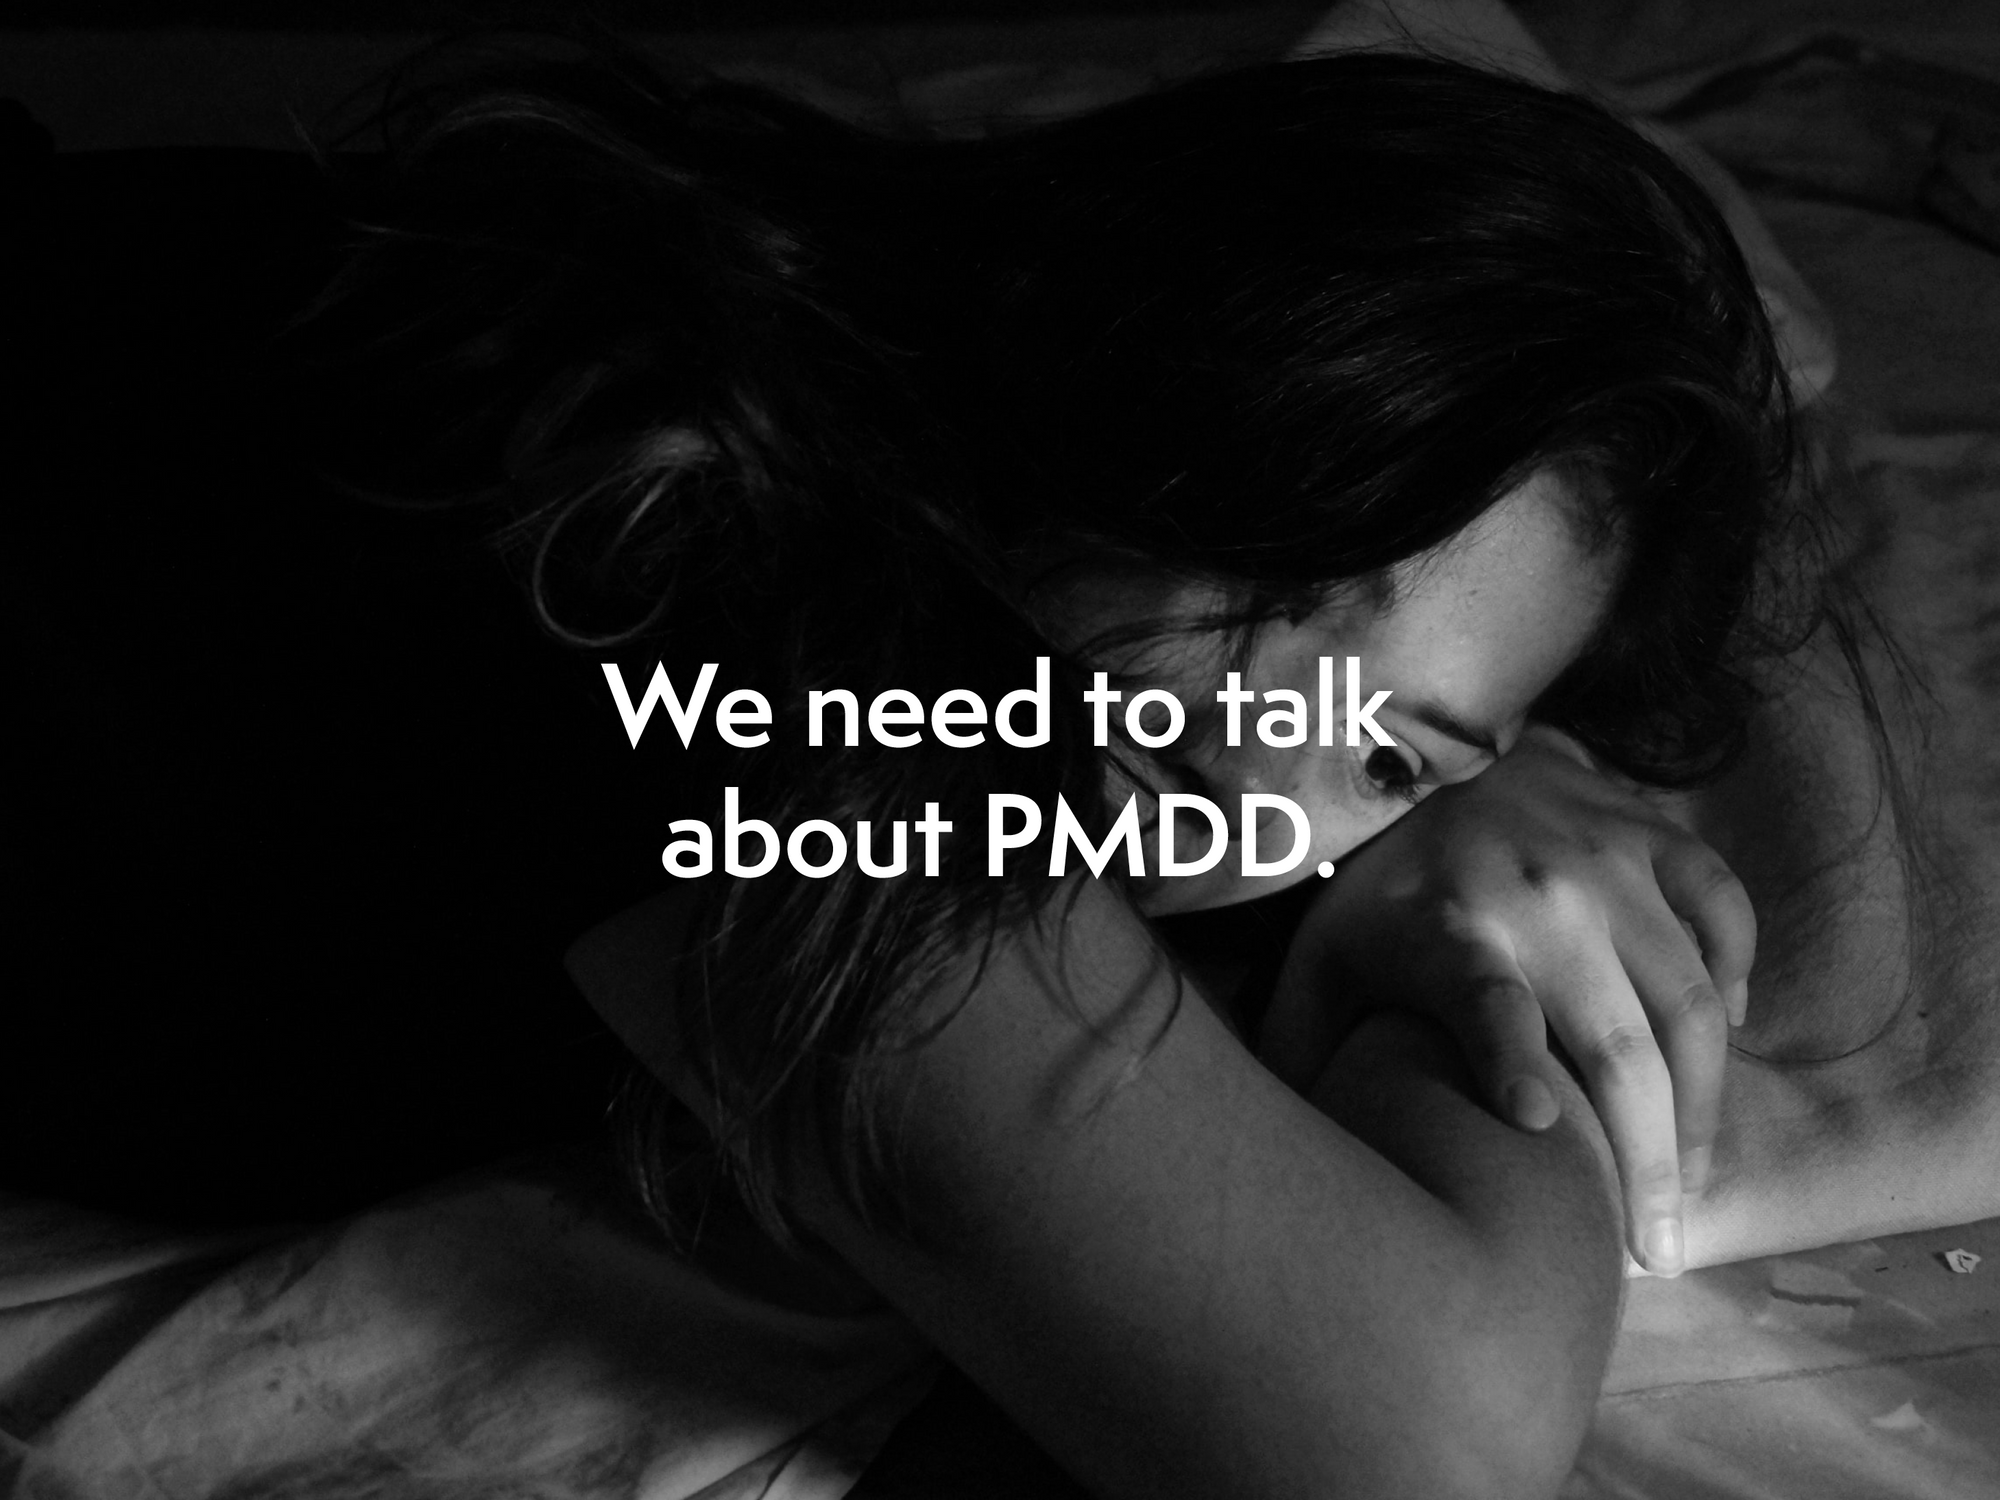 We need to talk about PMDD